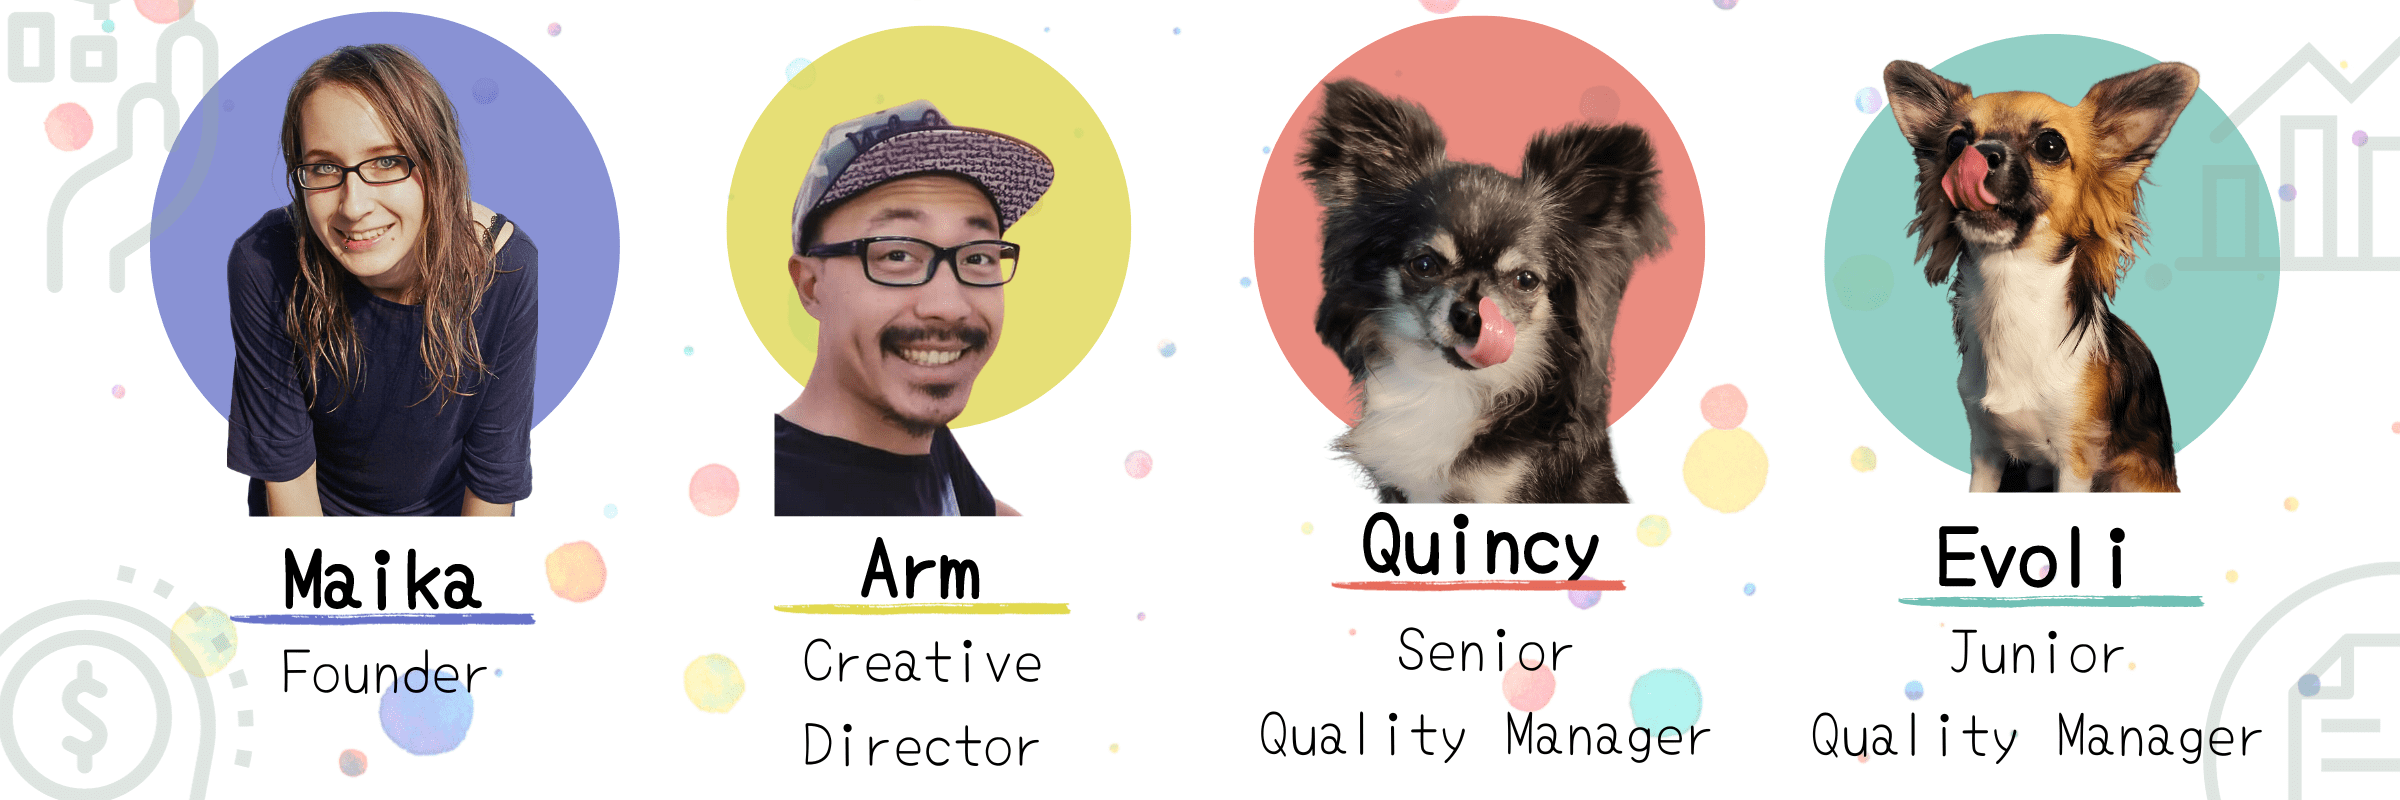 Maika, Founder - Arm, Breative Director - Quincy, Senior Quality Manager - Evoil, Junior Quality Manager